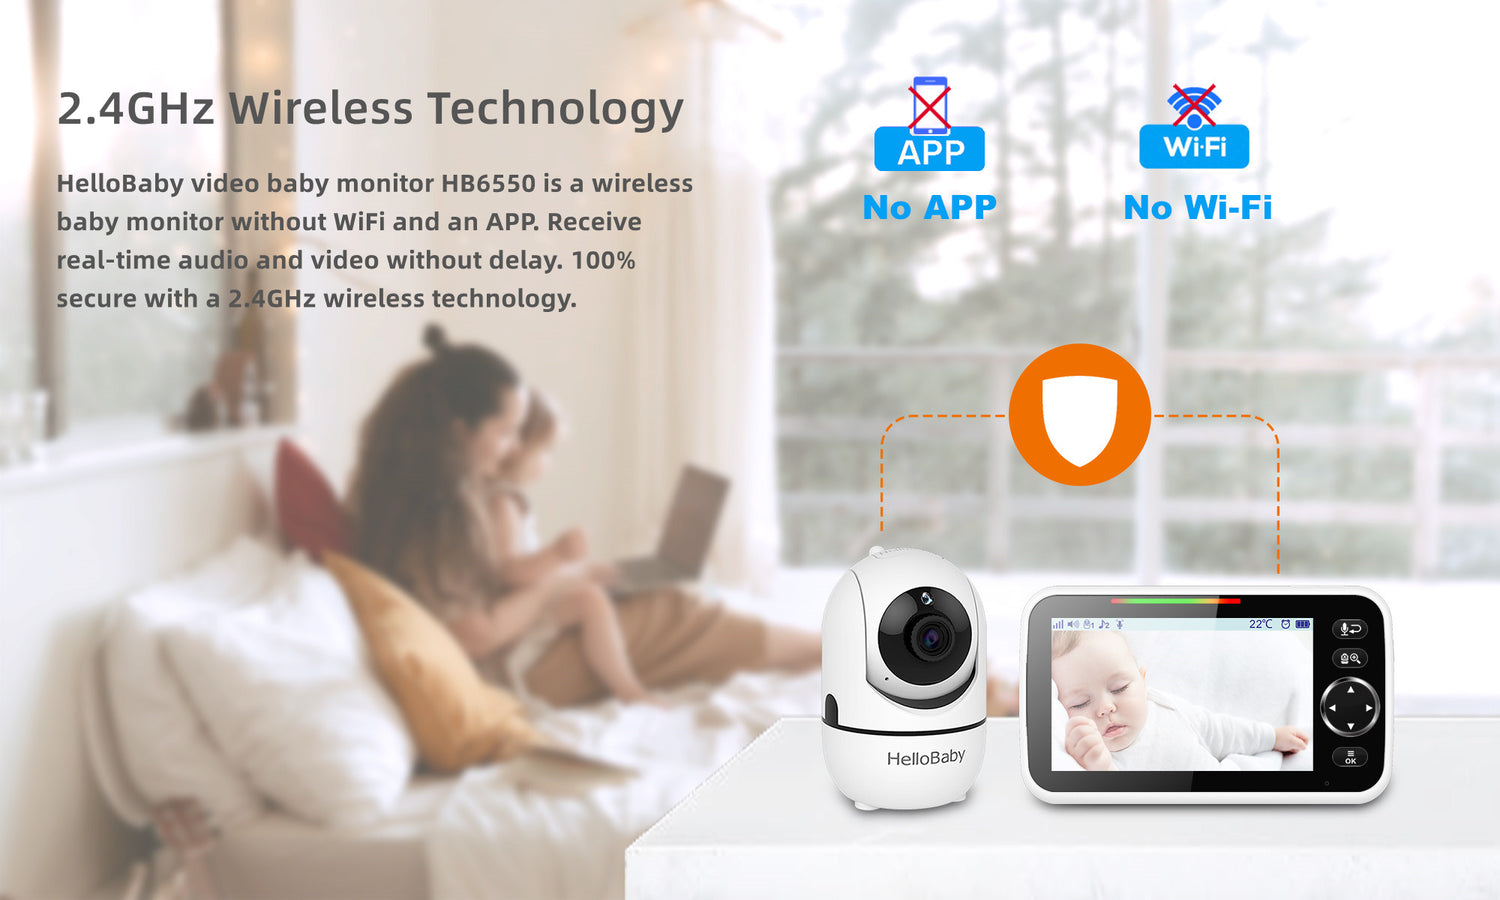 HelloBaby 2.4GHz wireless baby monitor